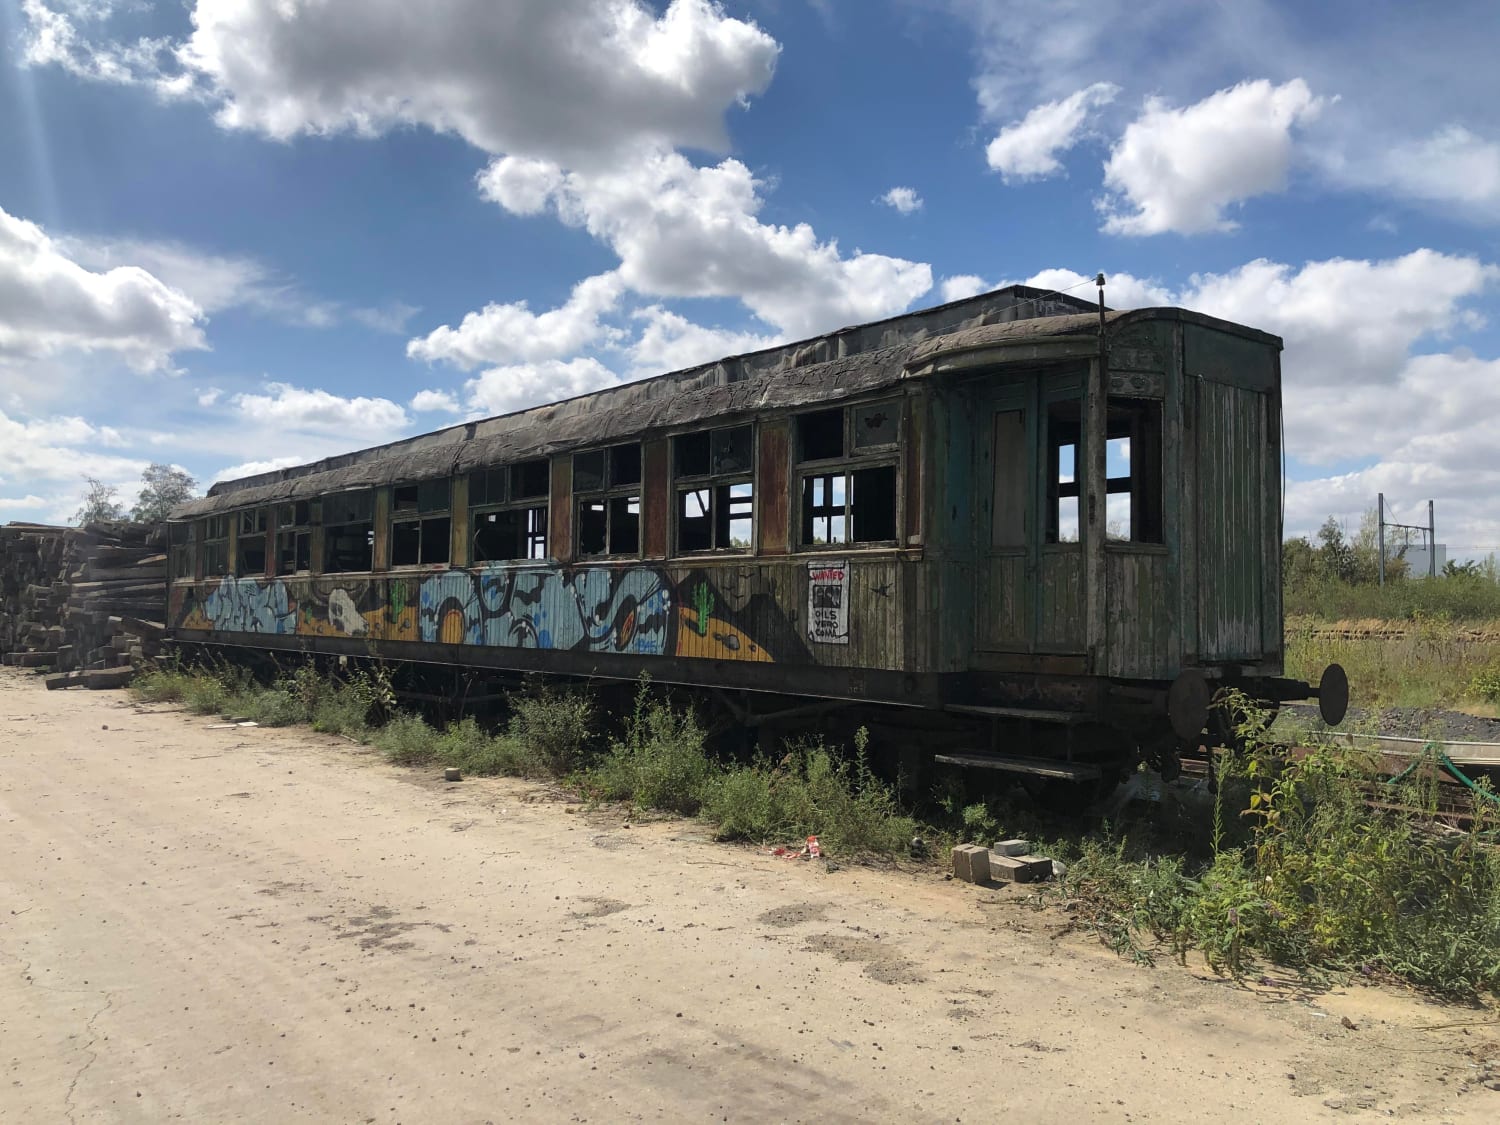 A luxurious first class wagon from 1907 slowly rotting away...